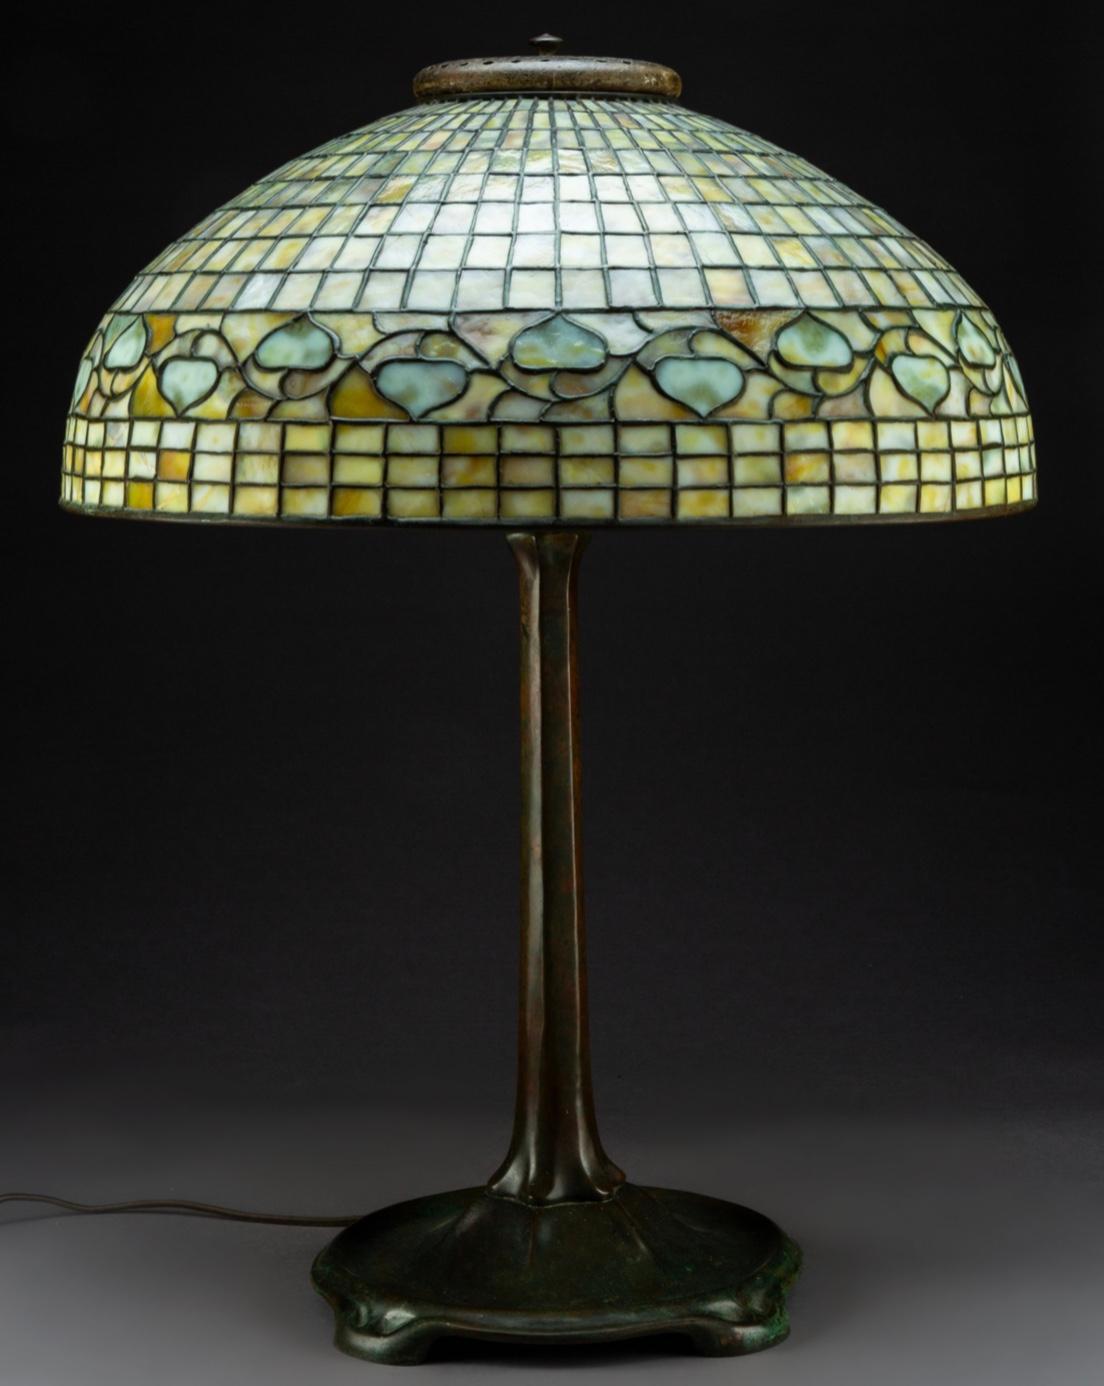 American Large Tiffany Studios “Acorn” Stained Glass Bronze Table Lamp